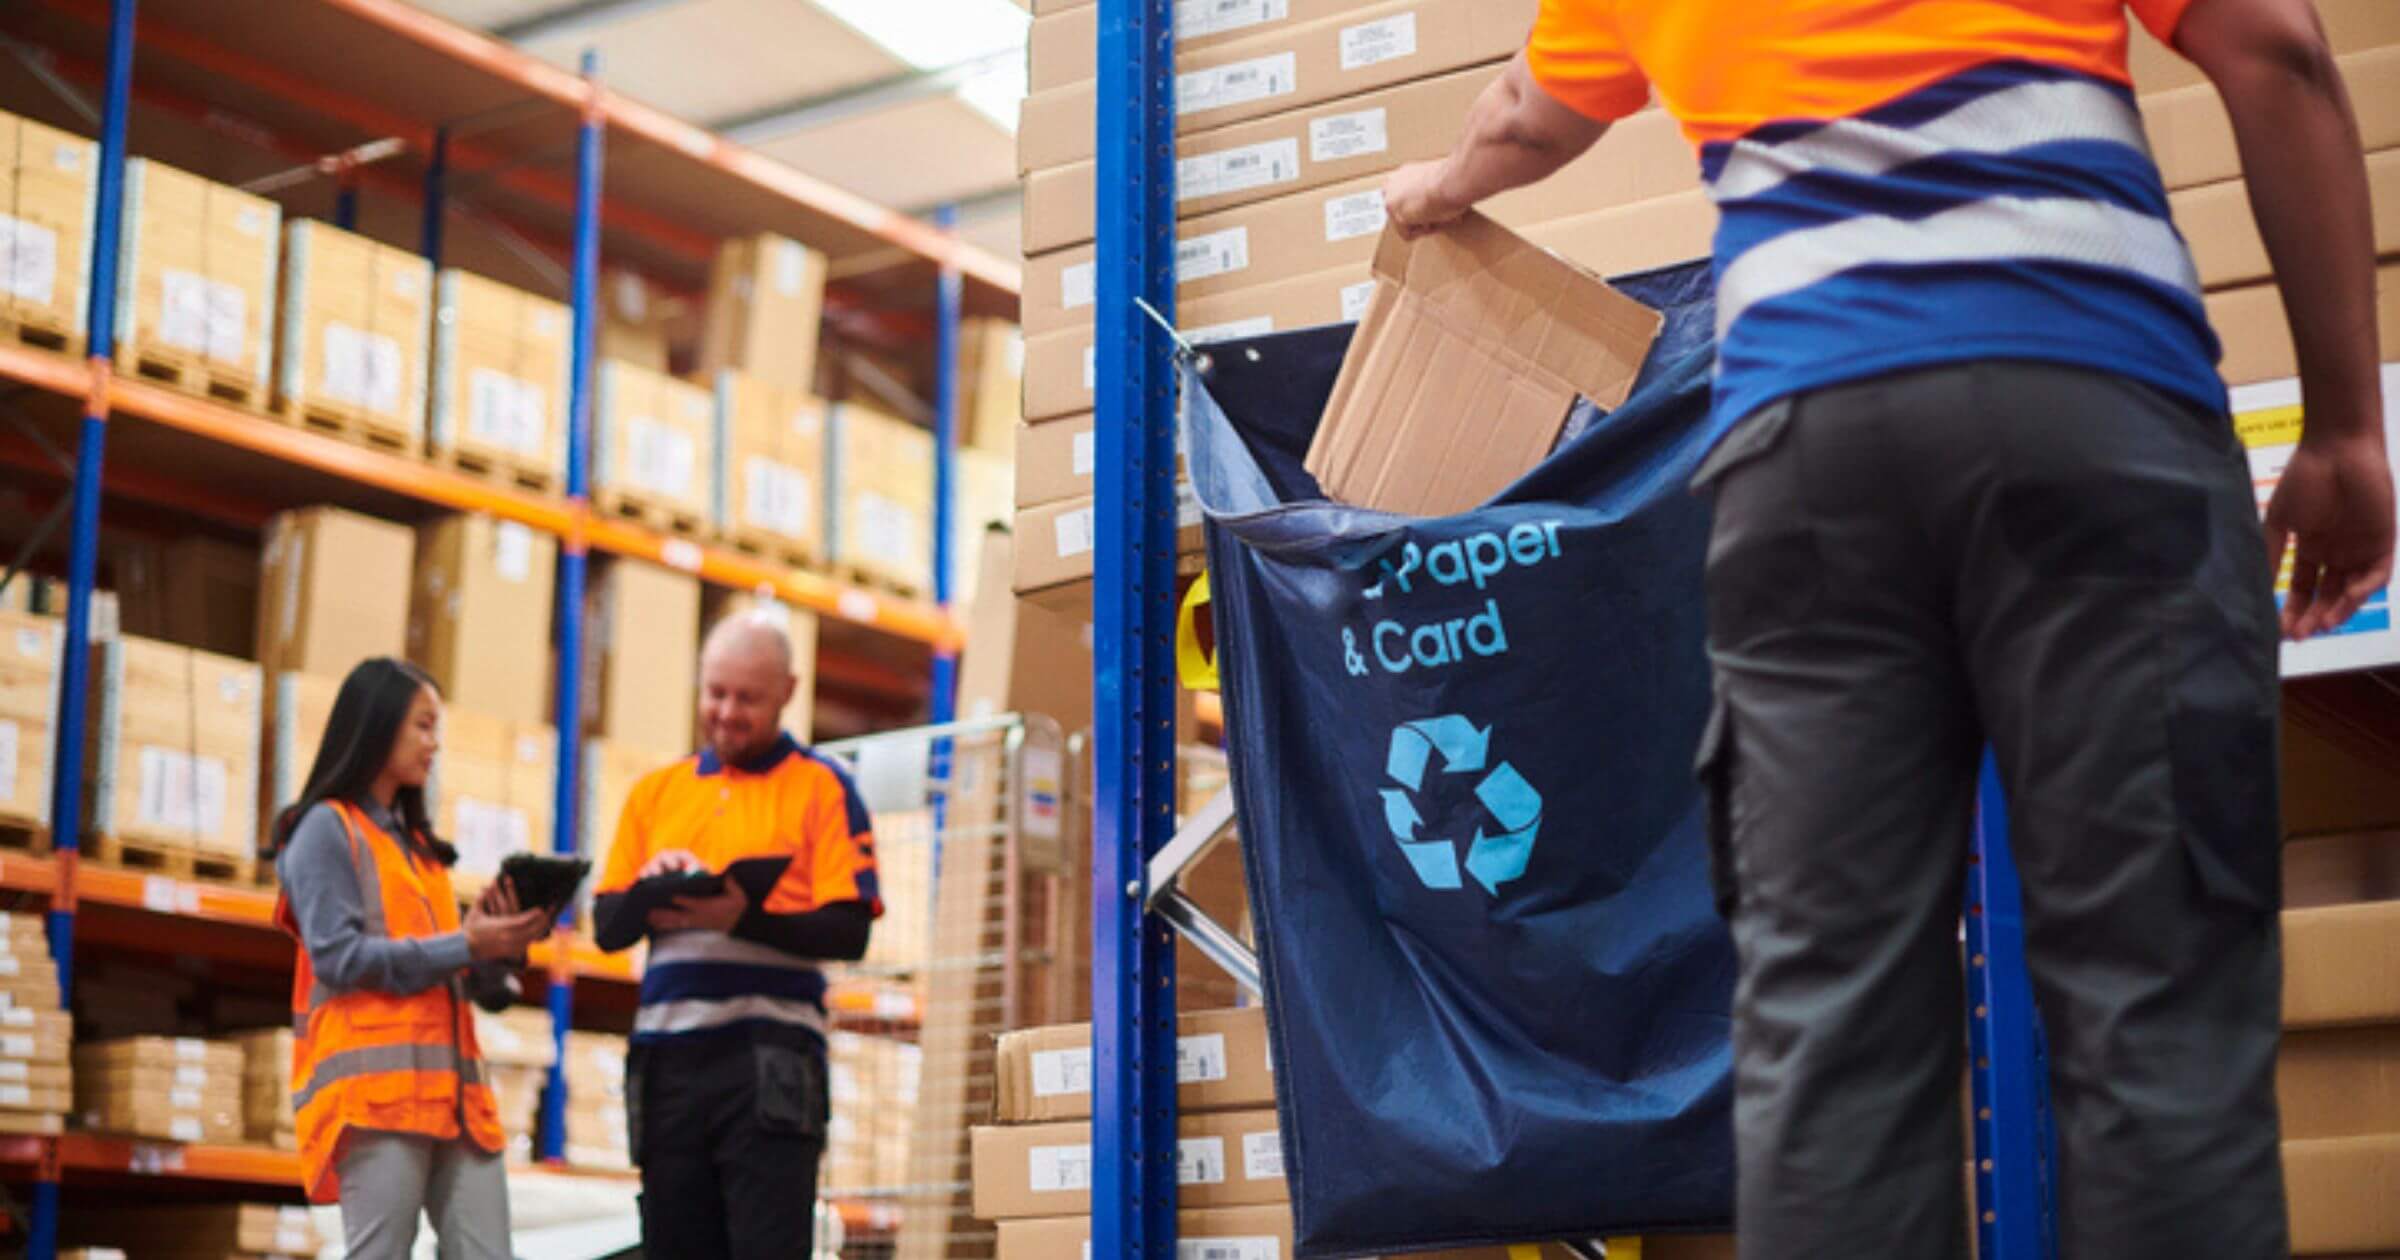 Three people in a warehouse with one person in the foreground putting cardboard in a recycling bag